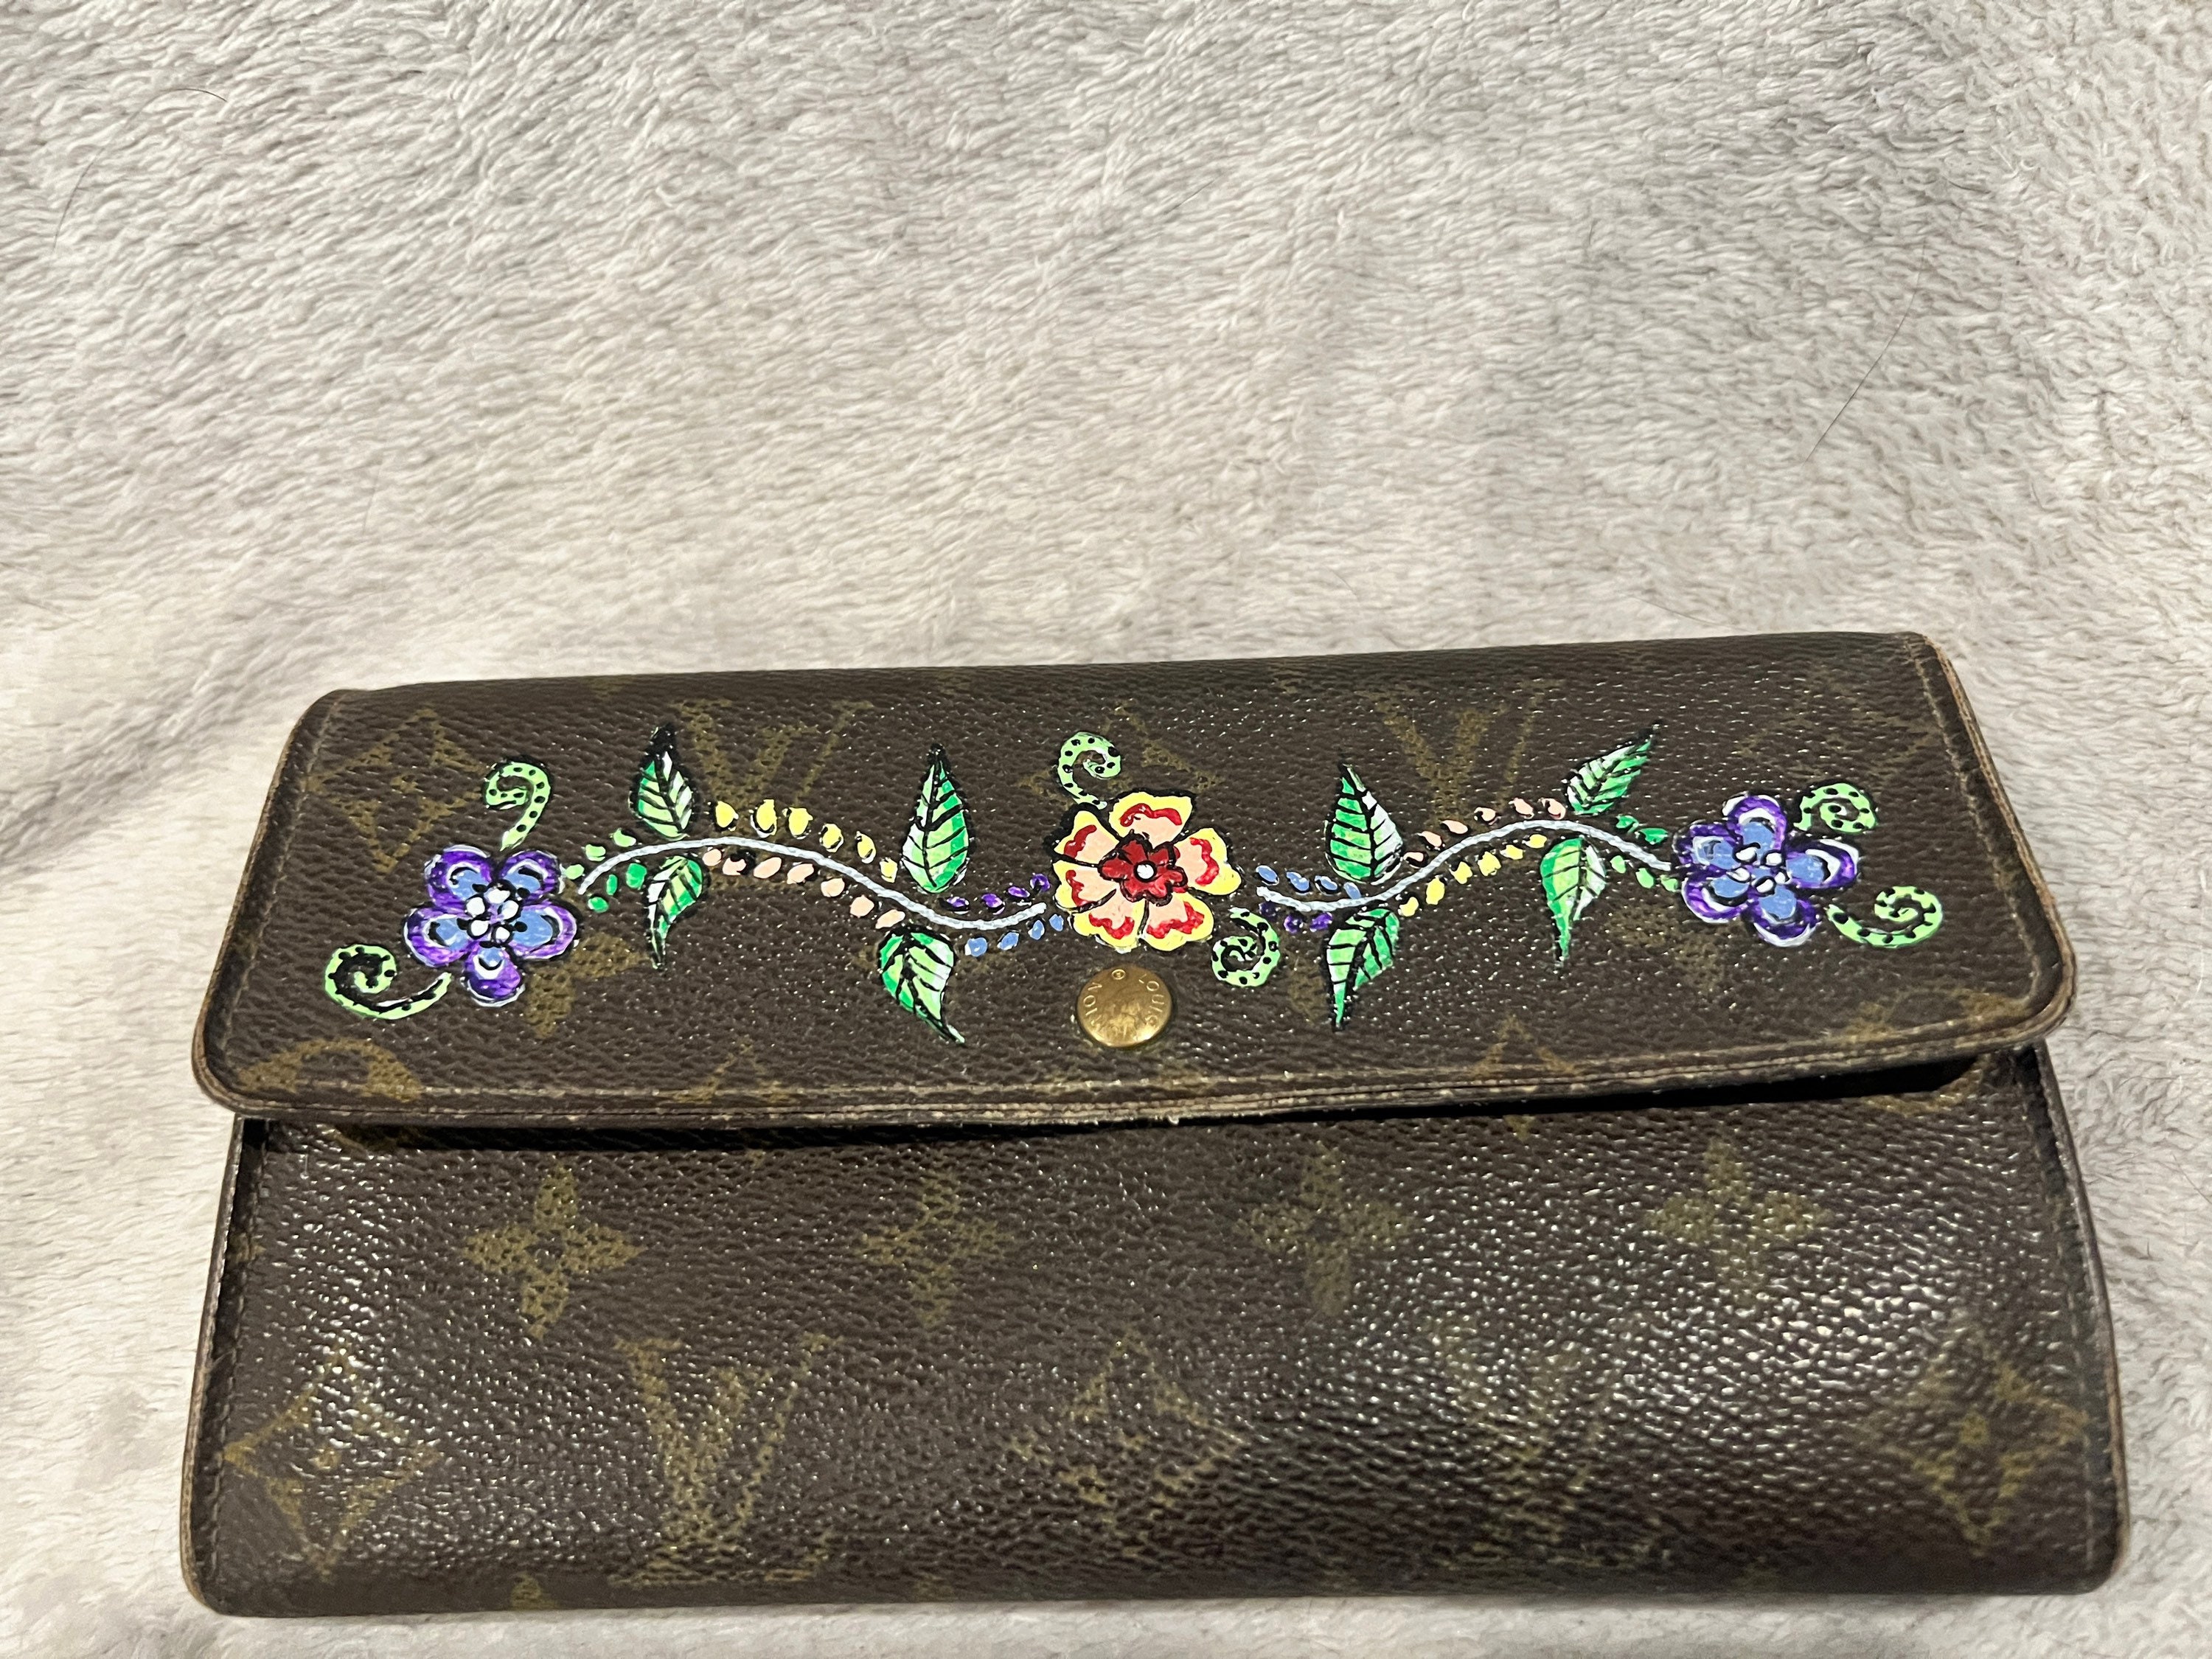 Vintage Designer Wallet With Hand Painted Flowers 